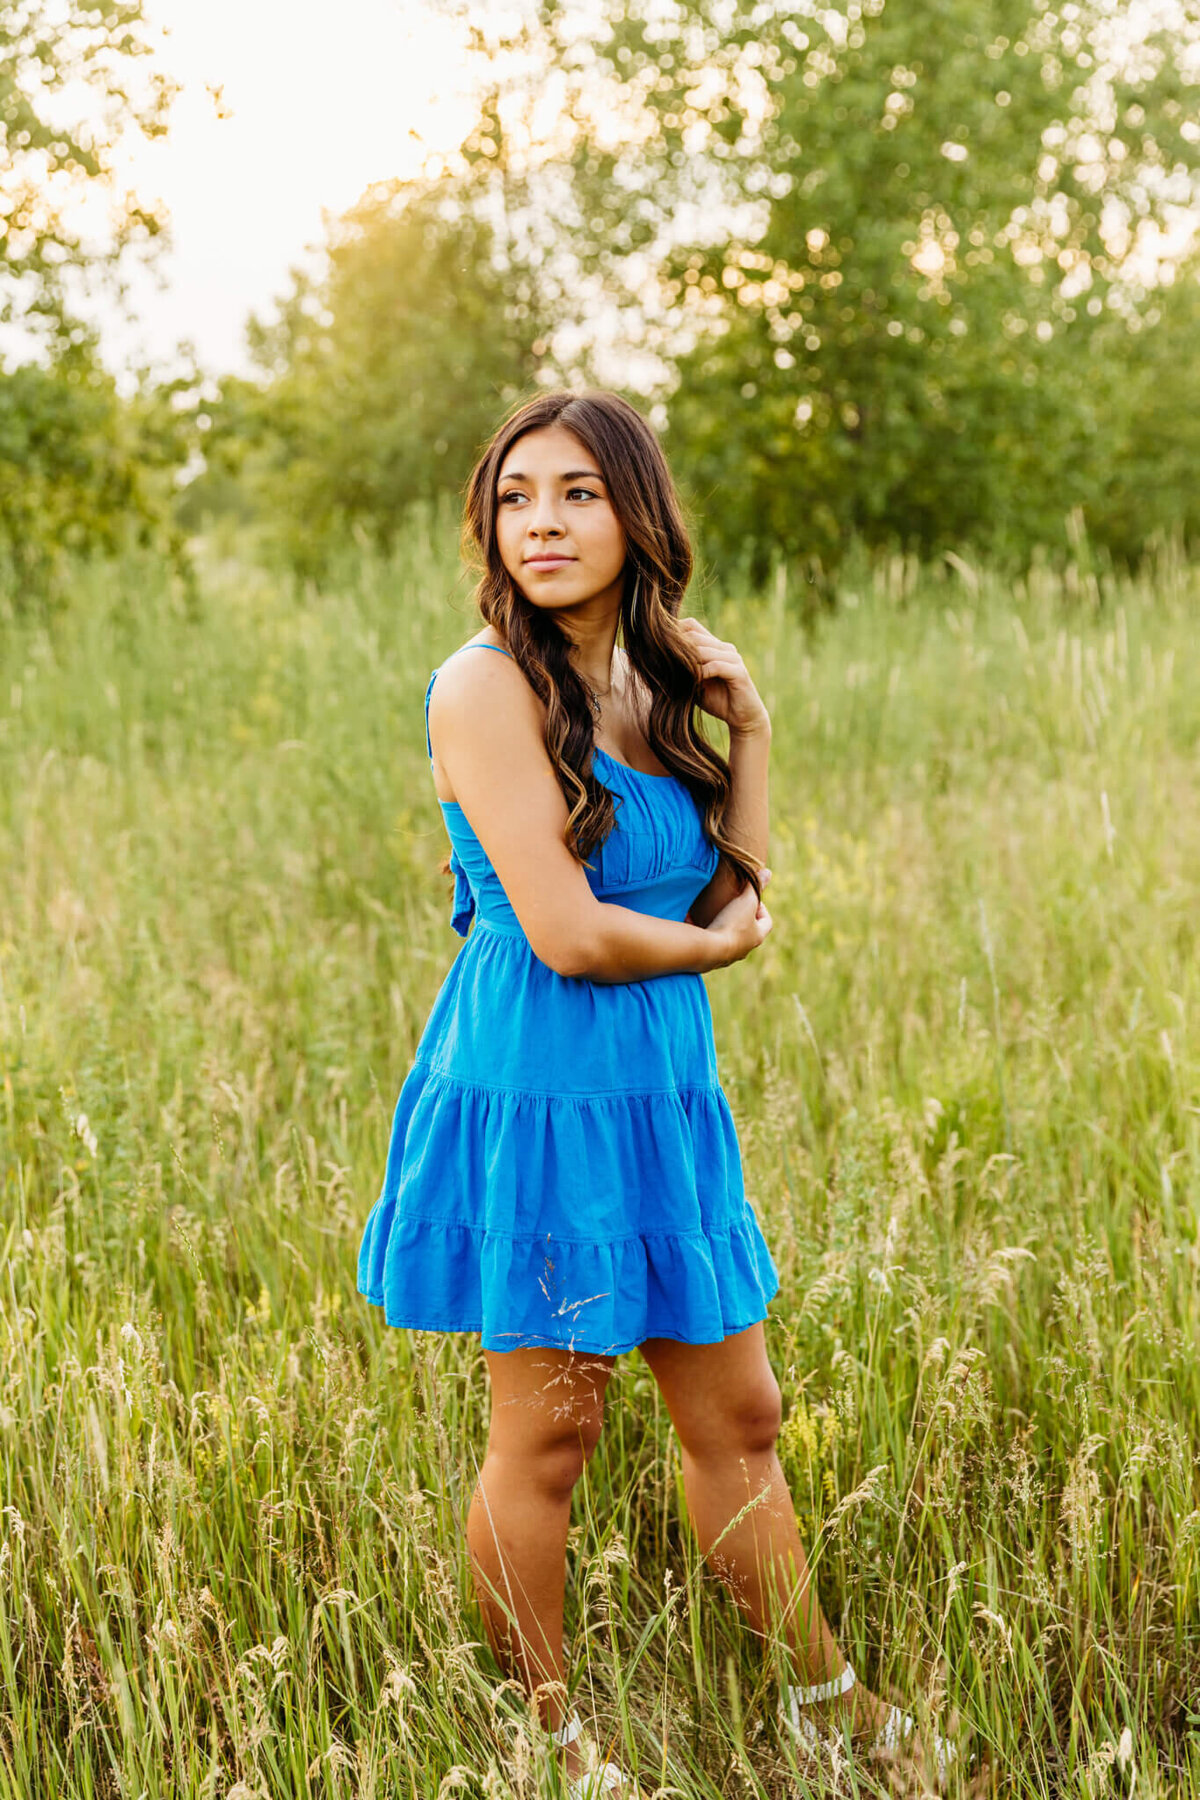 beautiful teenage girl in a bright blue dress playing with hair as she looks into the field